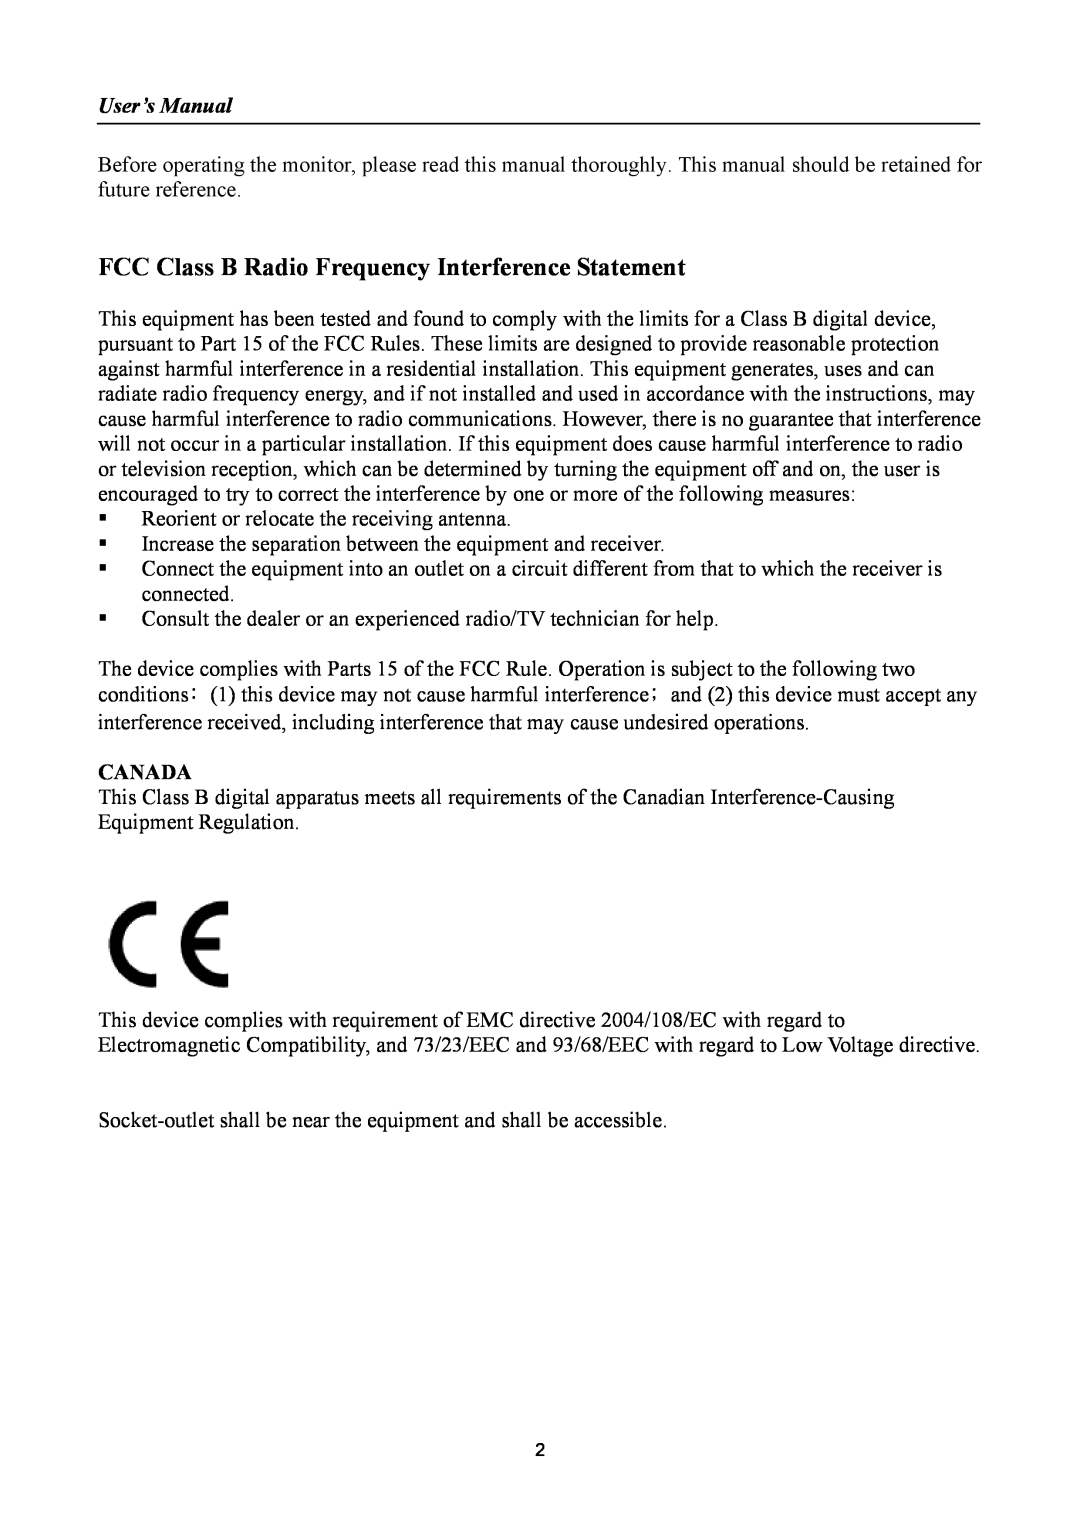 Hanns.G HSG 1095, HP222 manual FCC Class B Radio Frequency Interference Statement, User’s Manual, Canada 